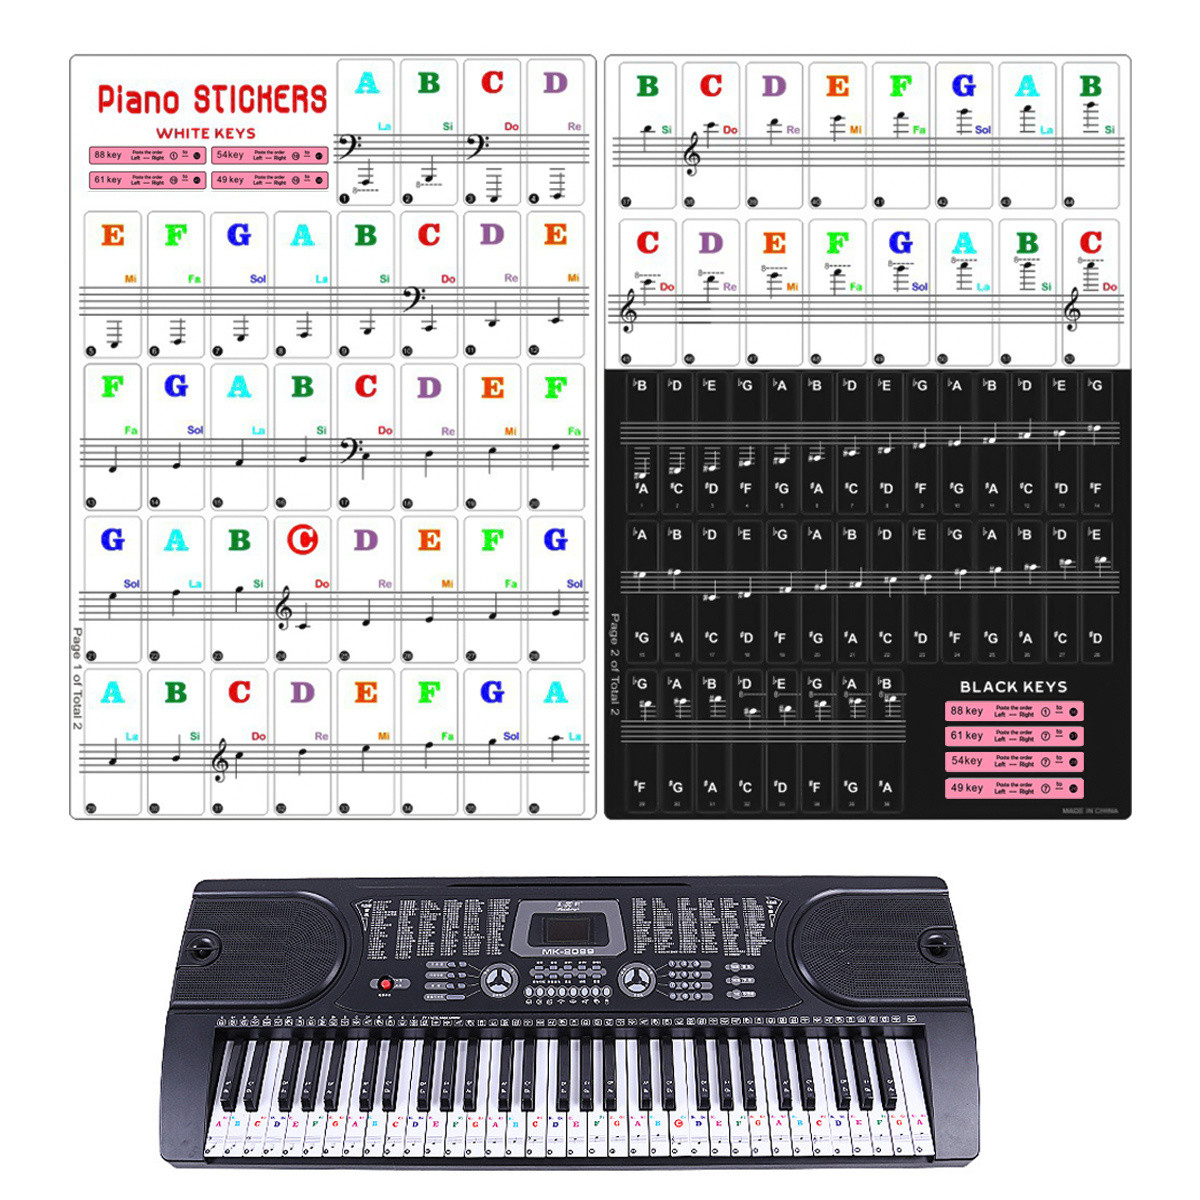 ANTAND Piano Keyboard Stickers Antand Removable Piano